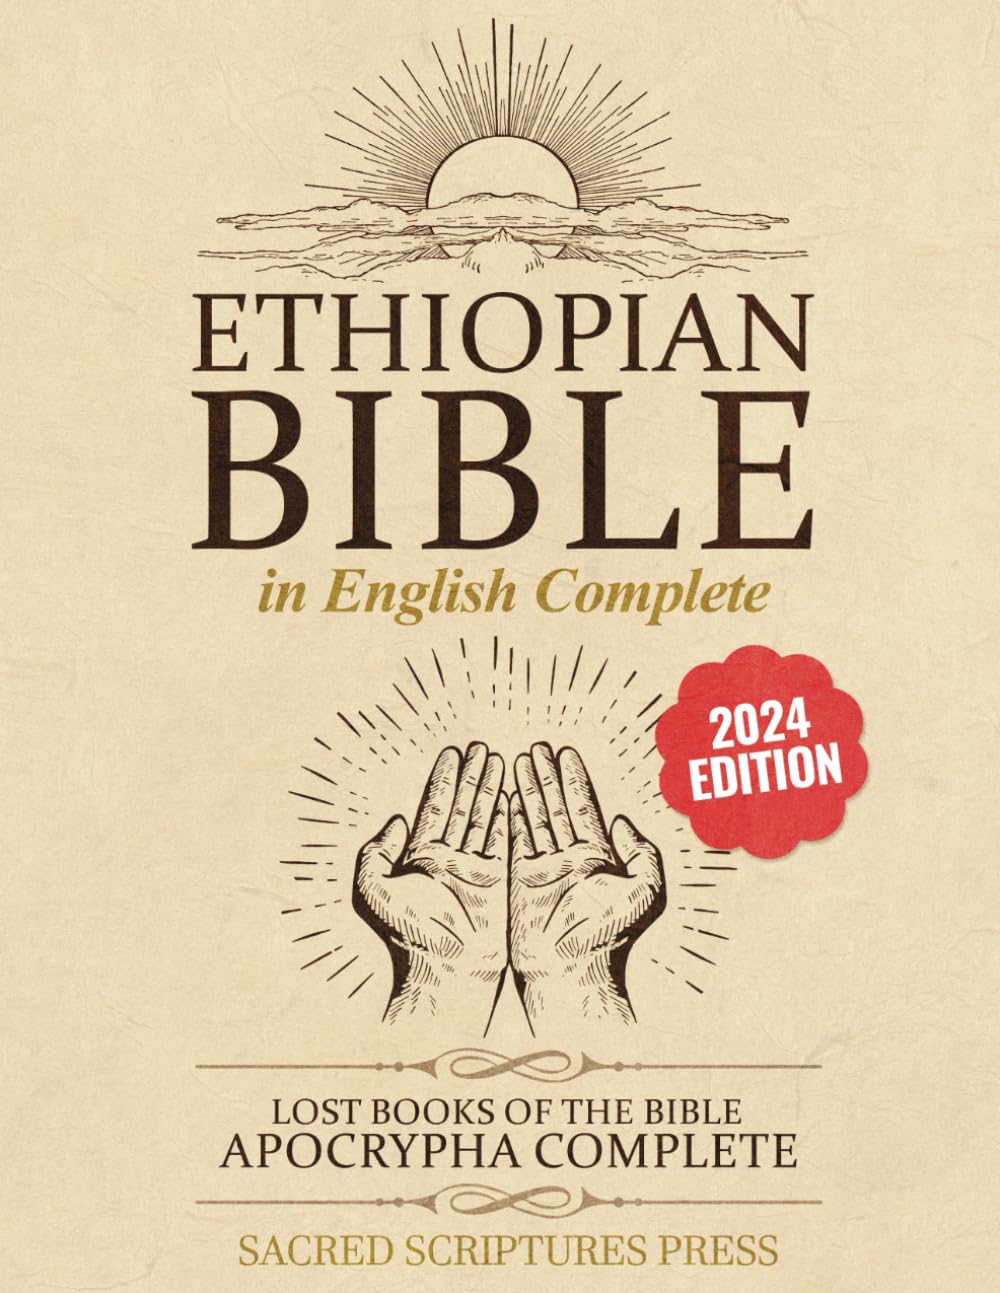 Ethiopian Bible in English Complete: Lost Books of the Bible. Apocrypha Complete